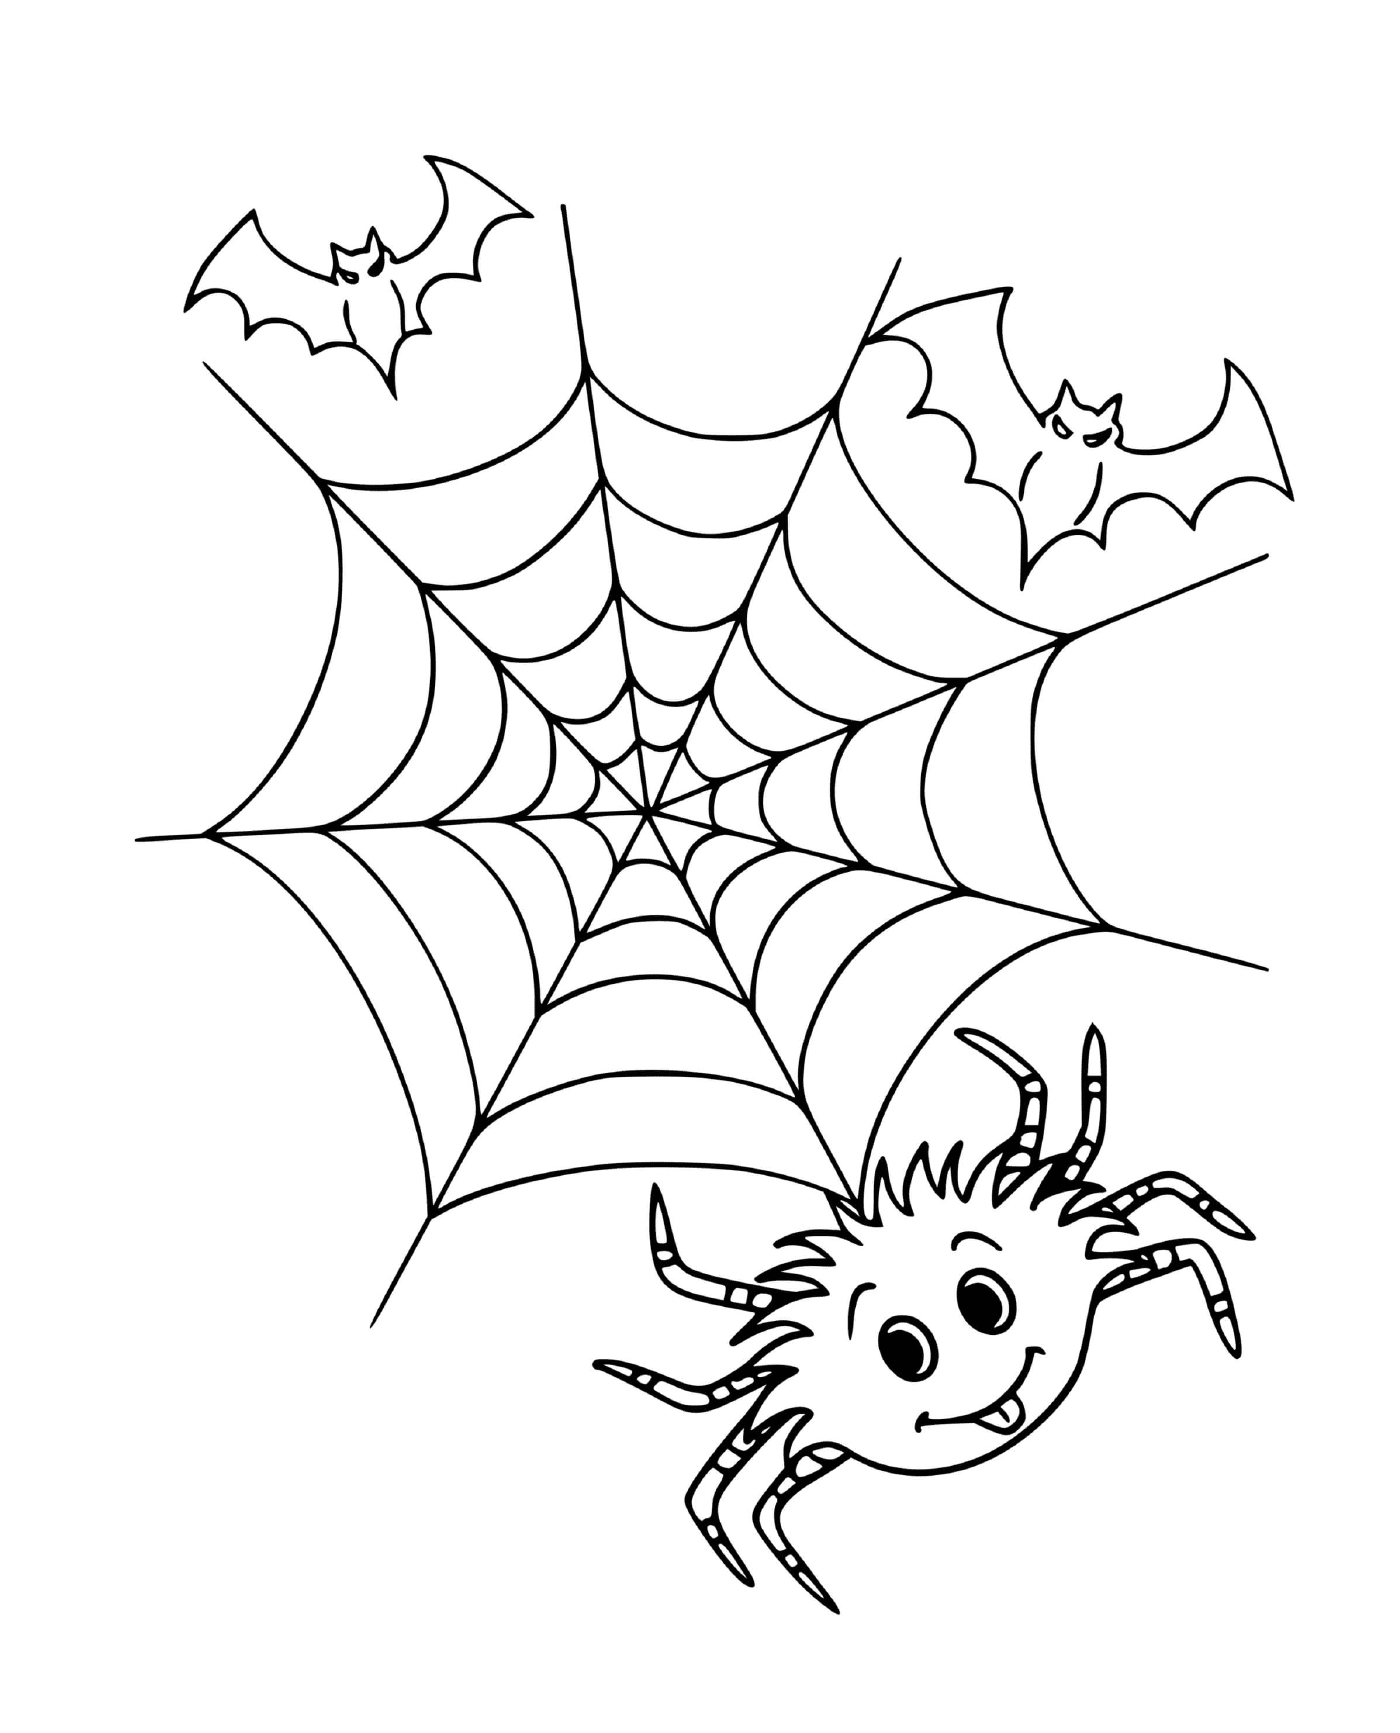  A spider and a bat 